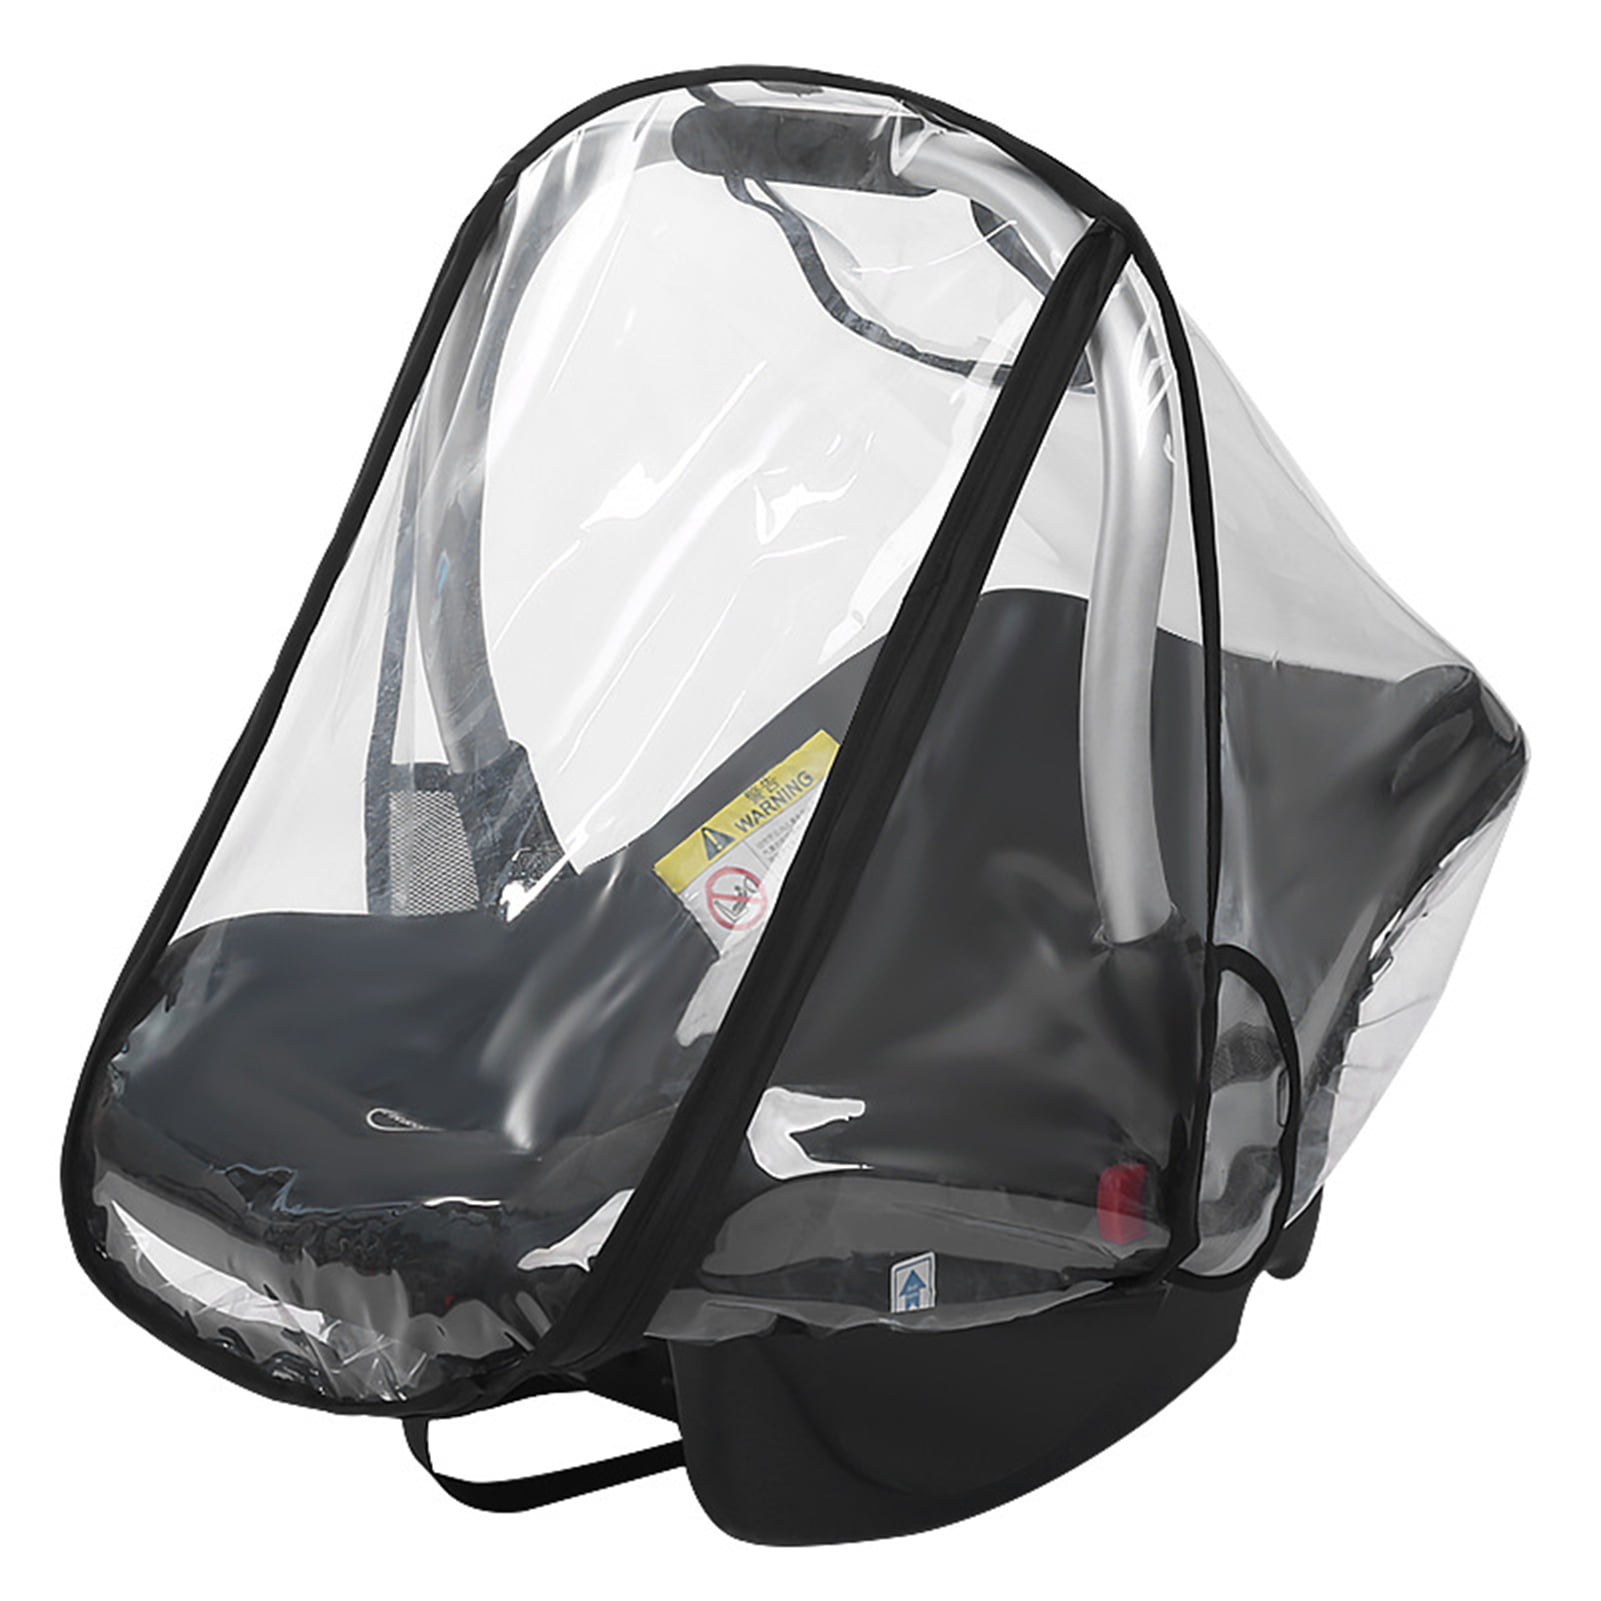 Hauck RAINY GROUP 0 CAR SEAT RAINCOVER Baby Child Car Seat Accessories BN 